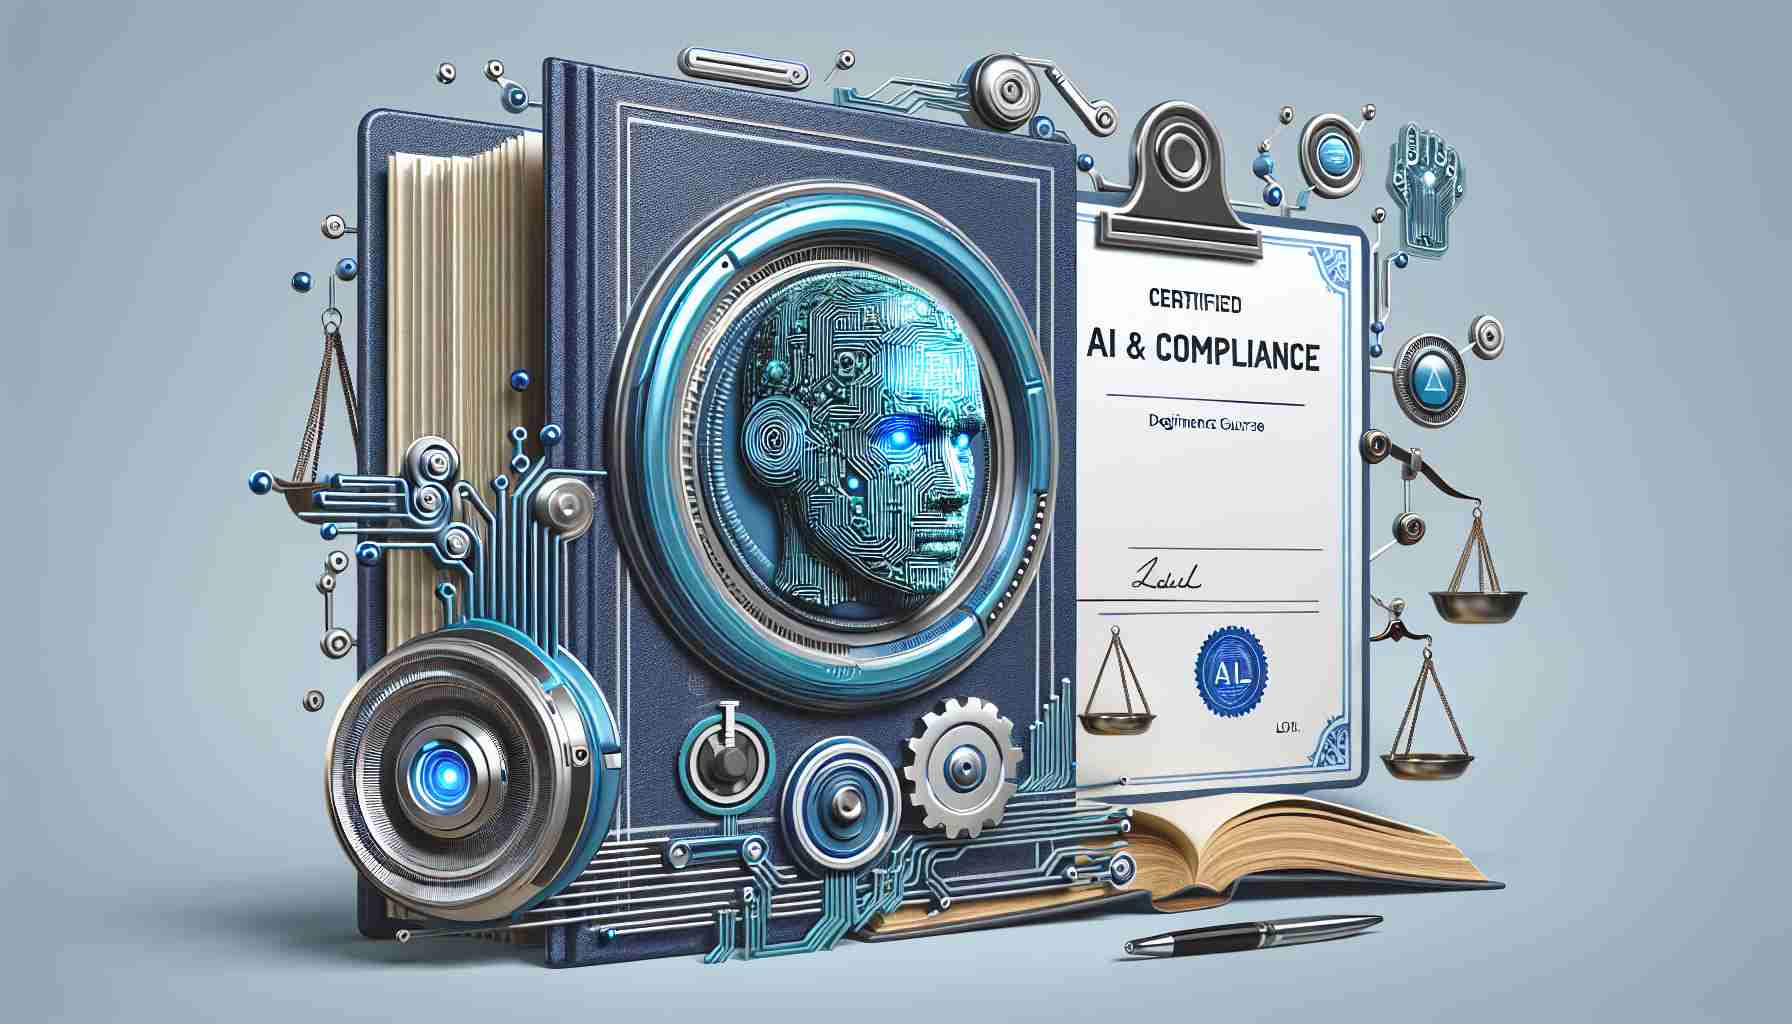 Upcoming Certified AI and Compliance Course for Legal Professionals